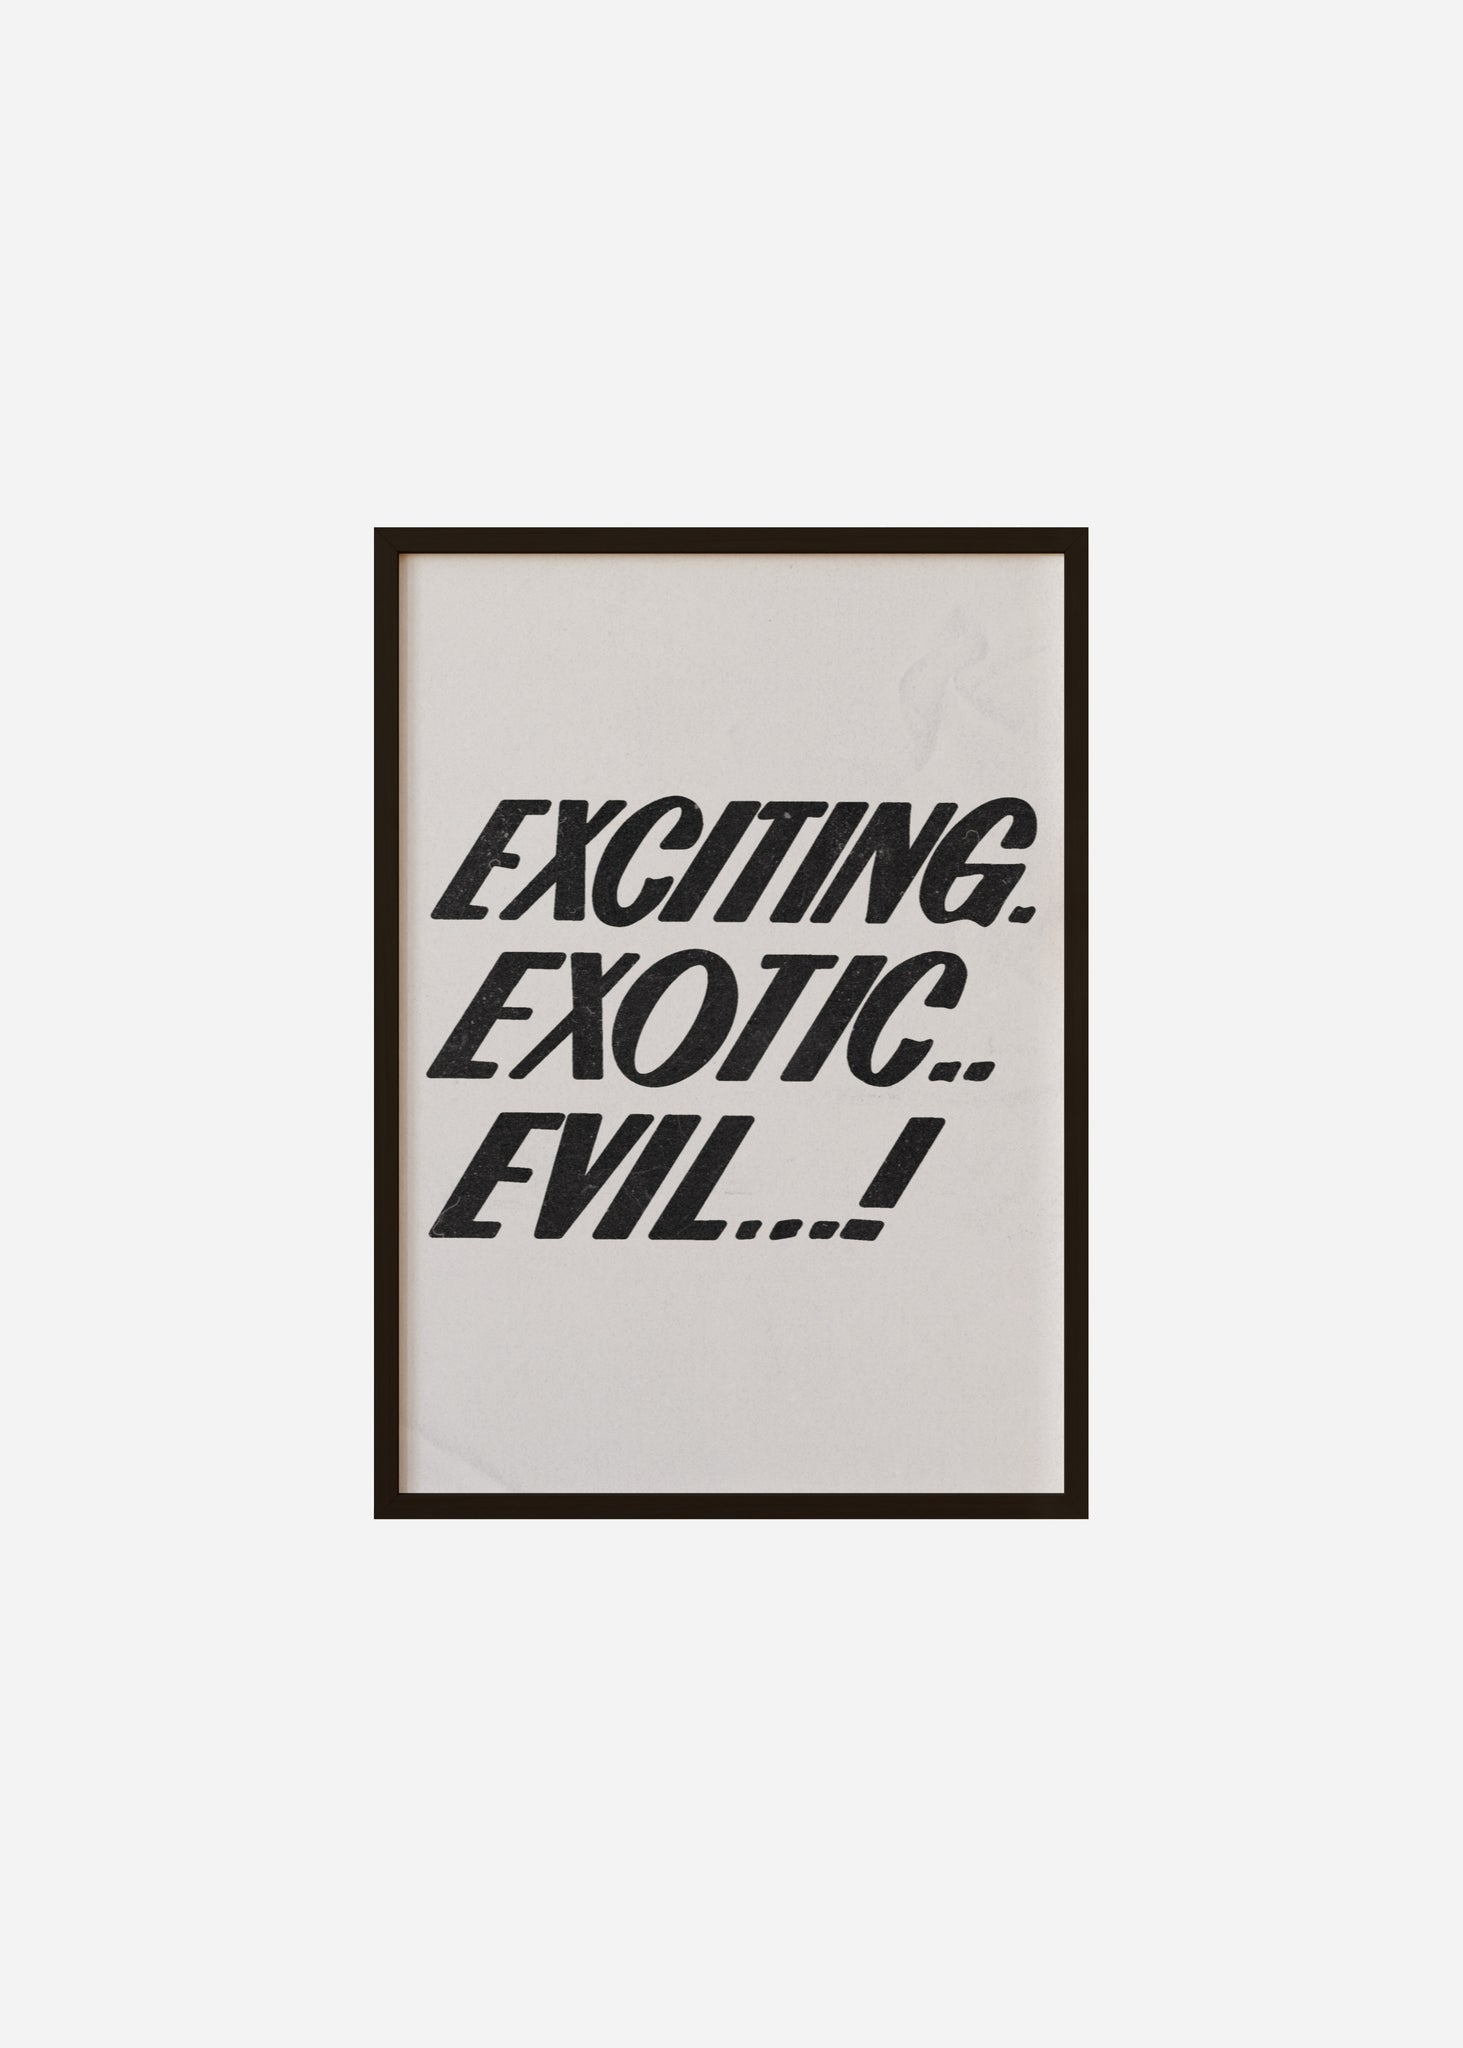 Exciting exotic evil! Framed Print